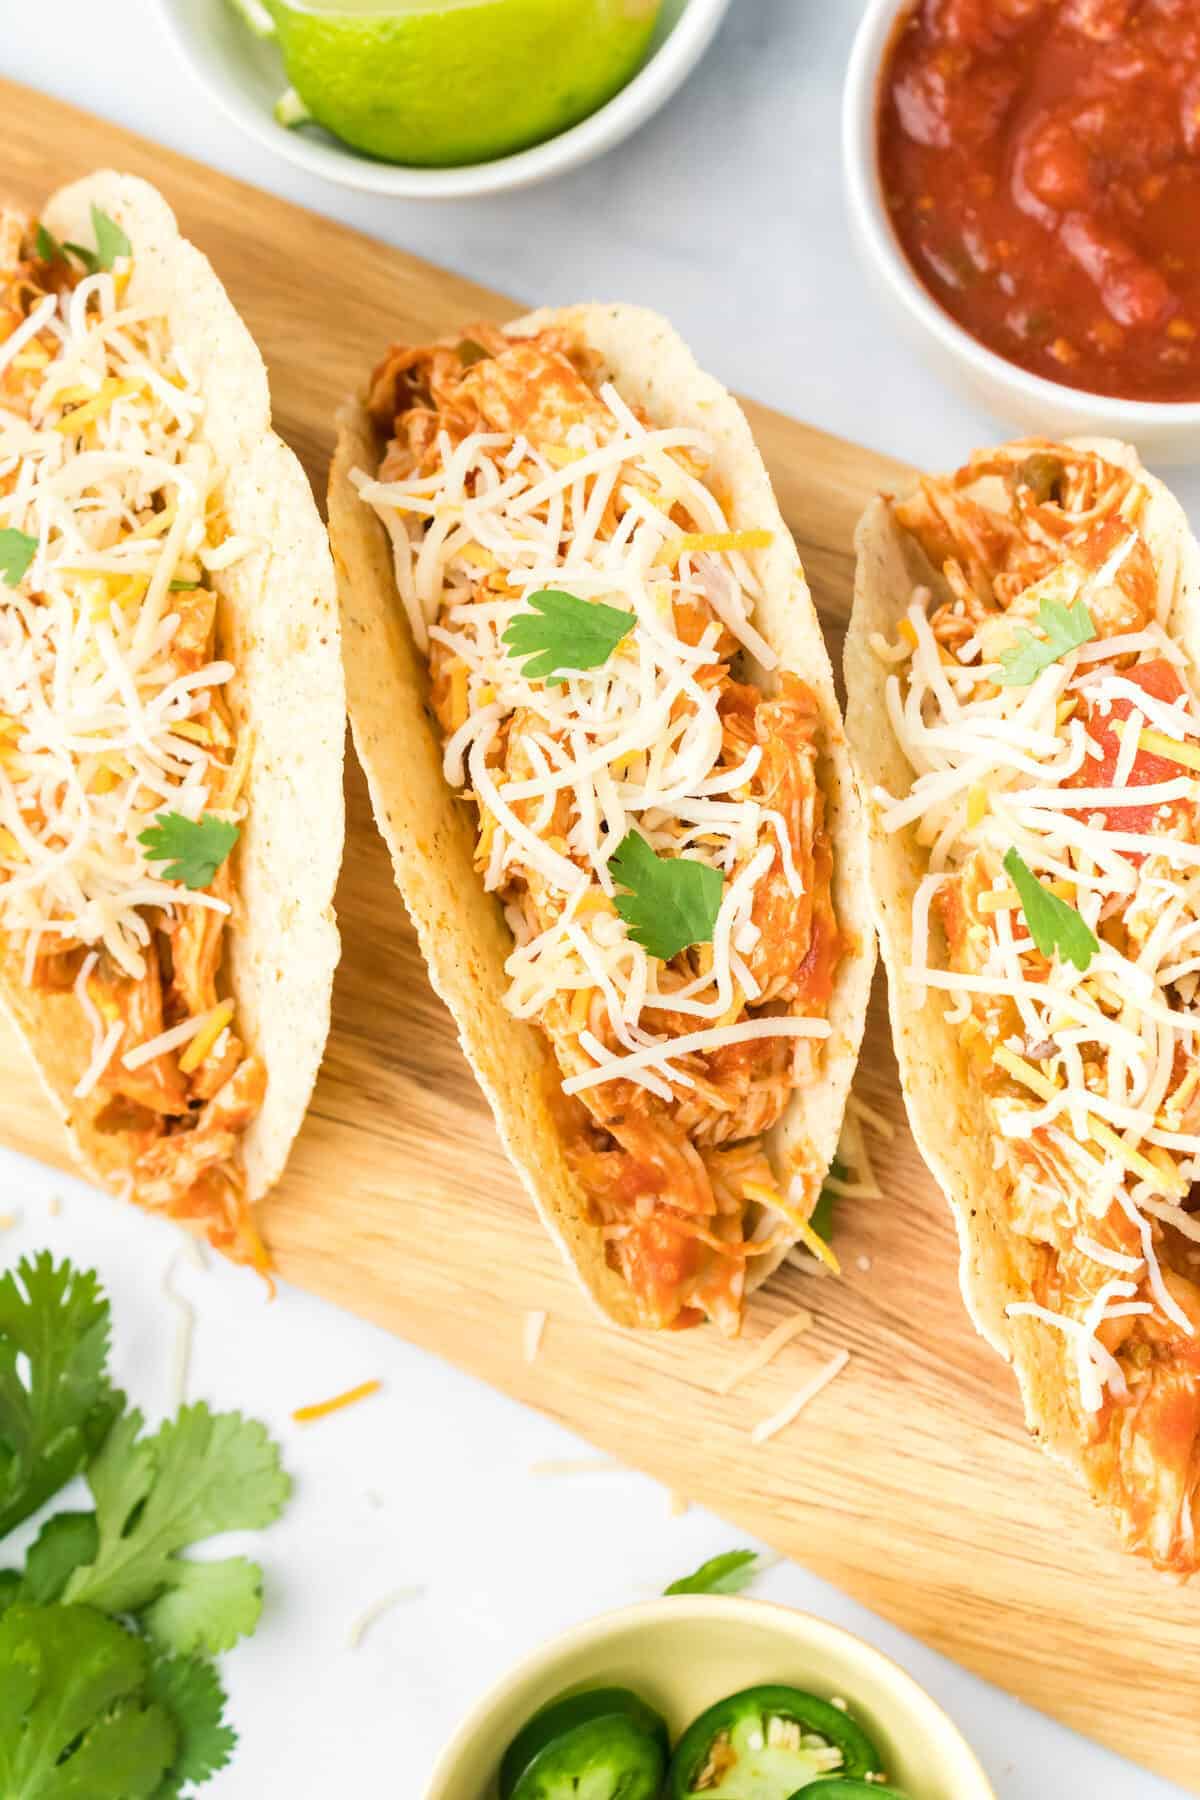 wooden board with shredded chicken tacos and small bowls of garnishes.